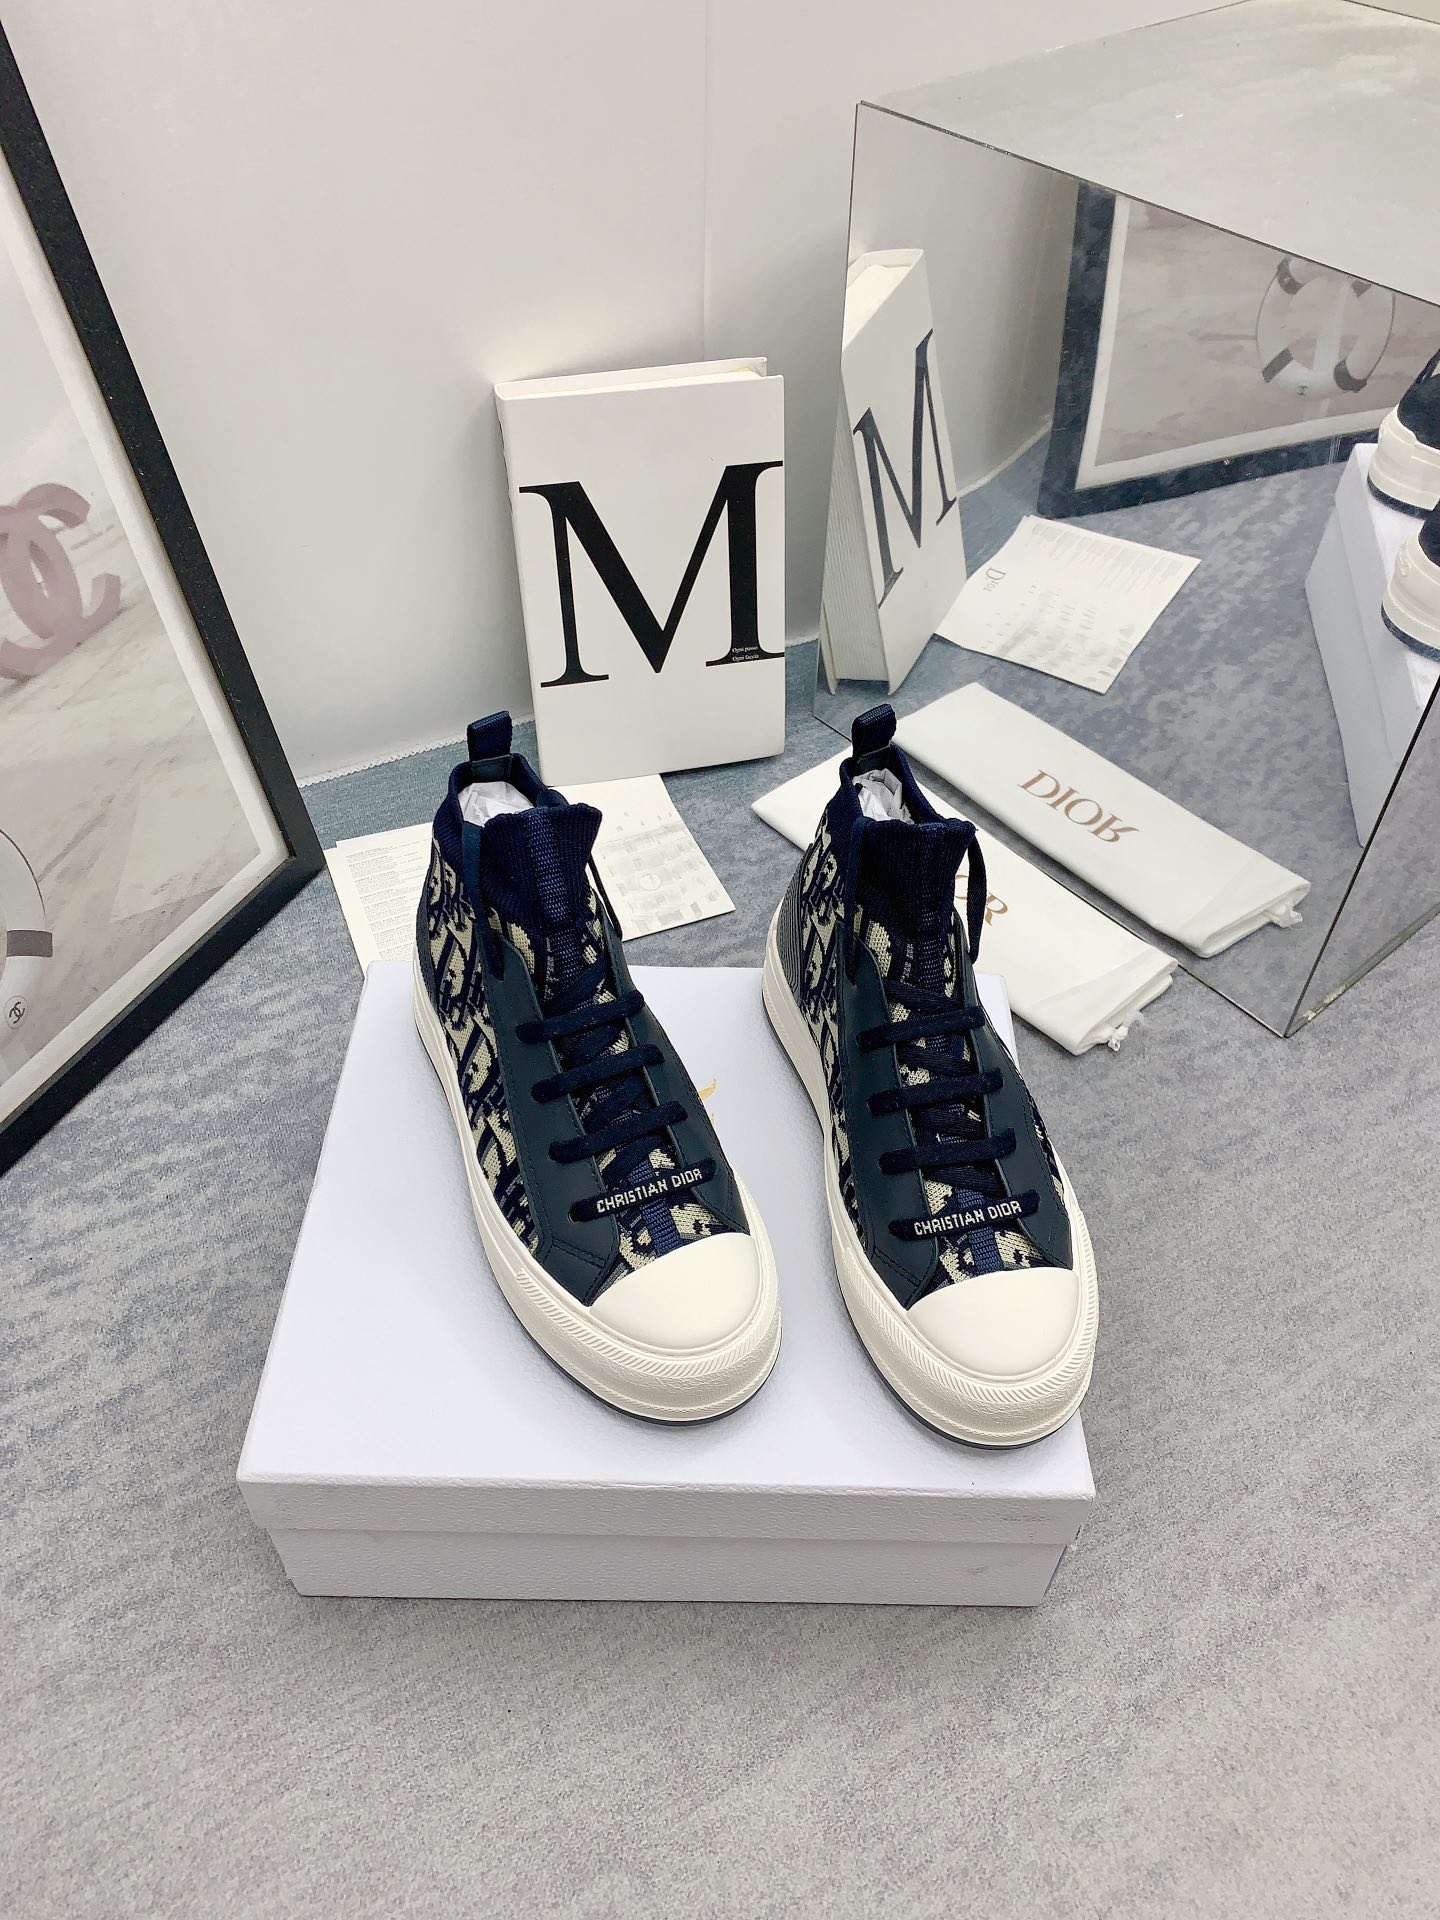 First Copy
 Dior Sneakers Canvas Shoes Embroidery Canvas Cotton Cowhide Sheepskin Oblique Casual